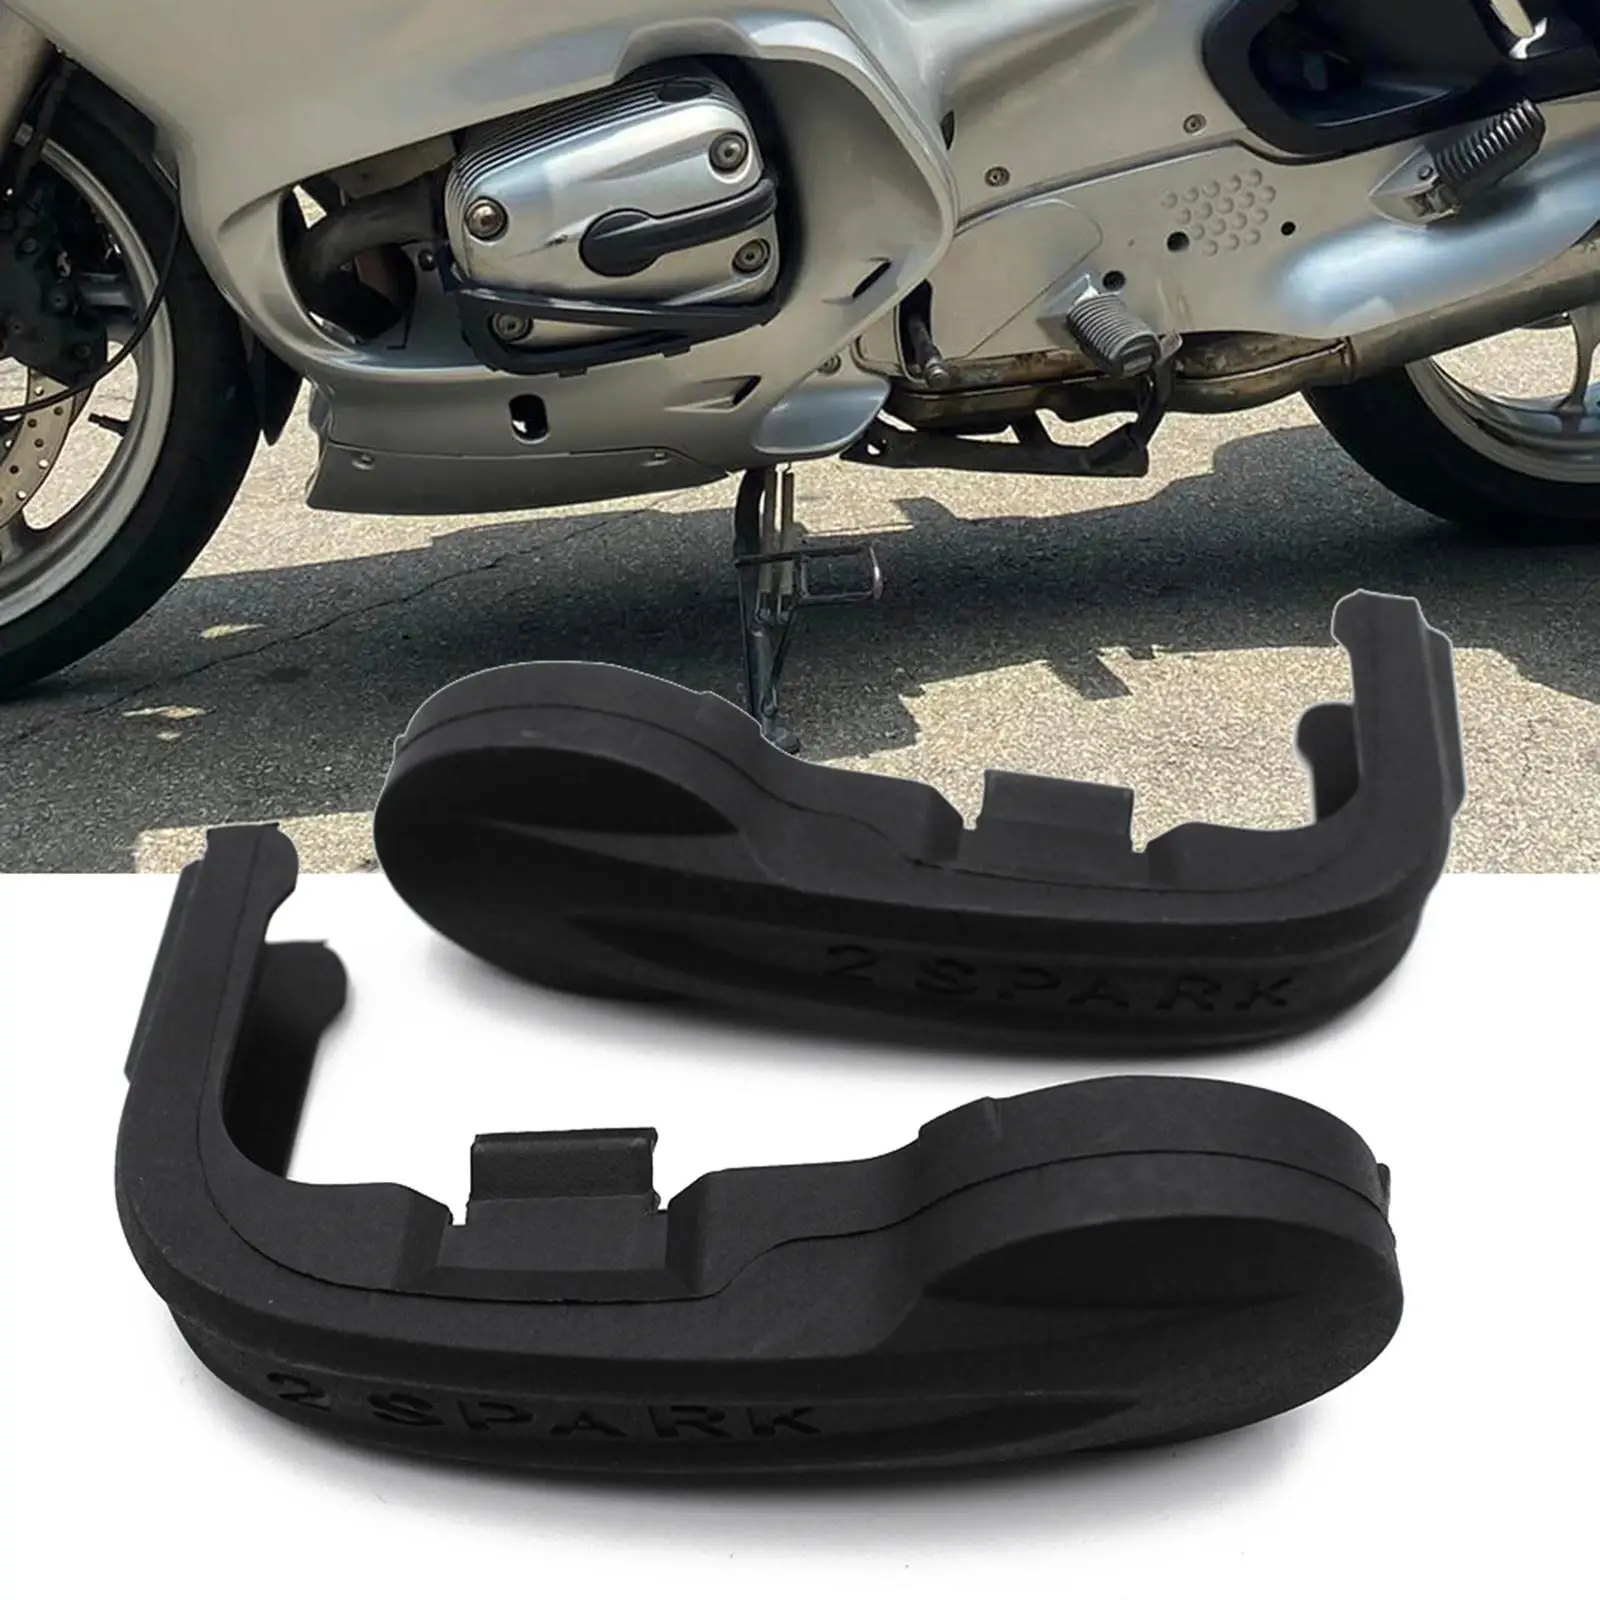 2x Motorcycle Ignition Spark Plug Cover Replace Parts High Performance for BMW R1150GS R1150RT R1150R Motorbike Accessories